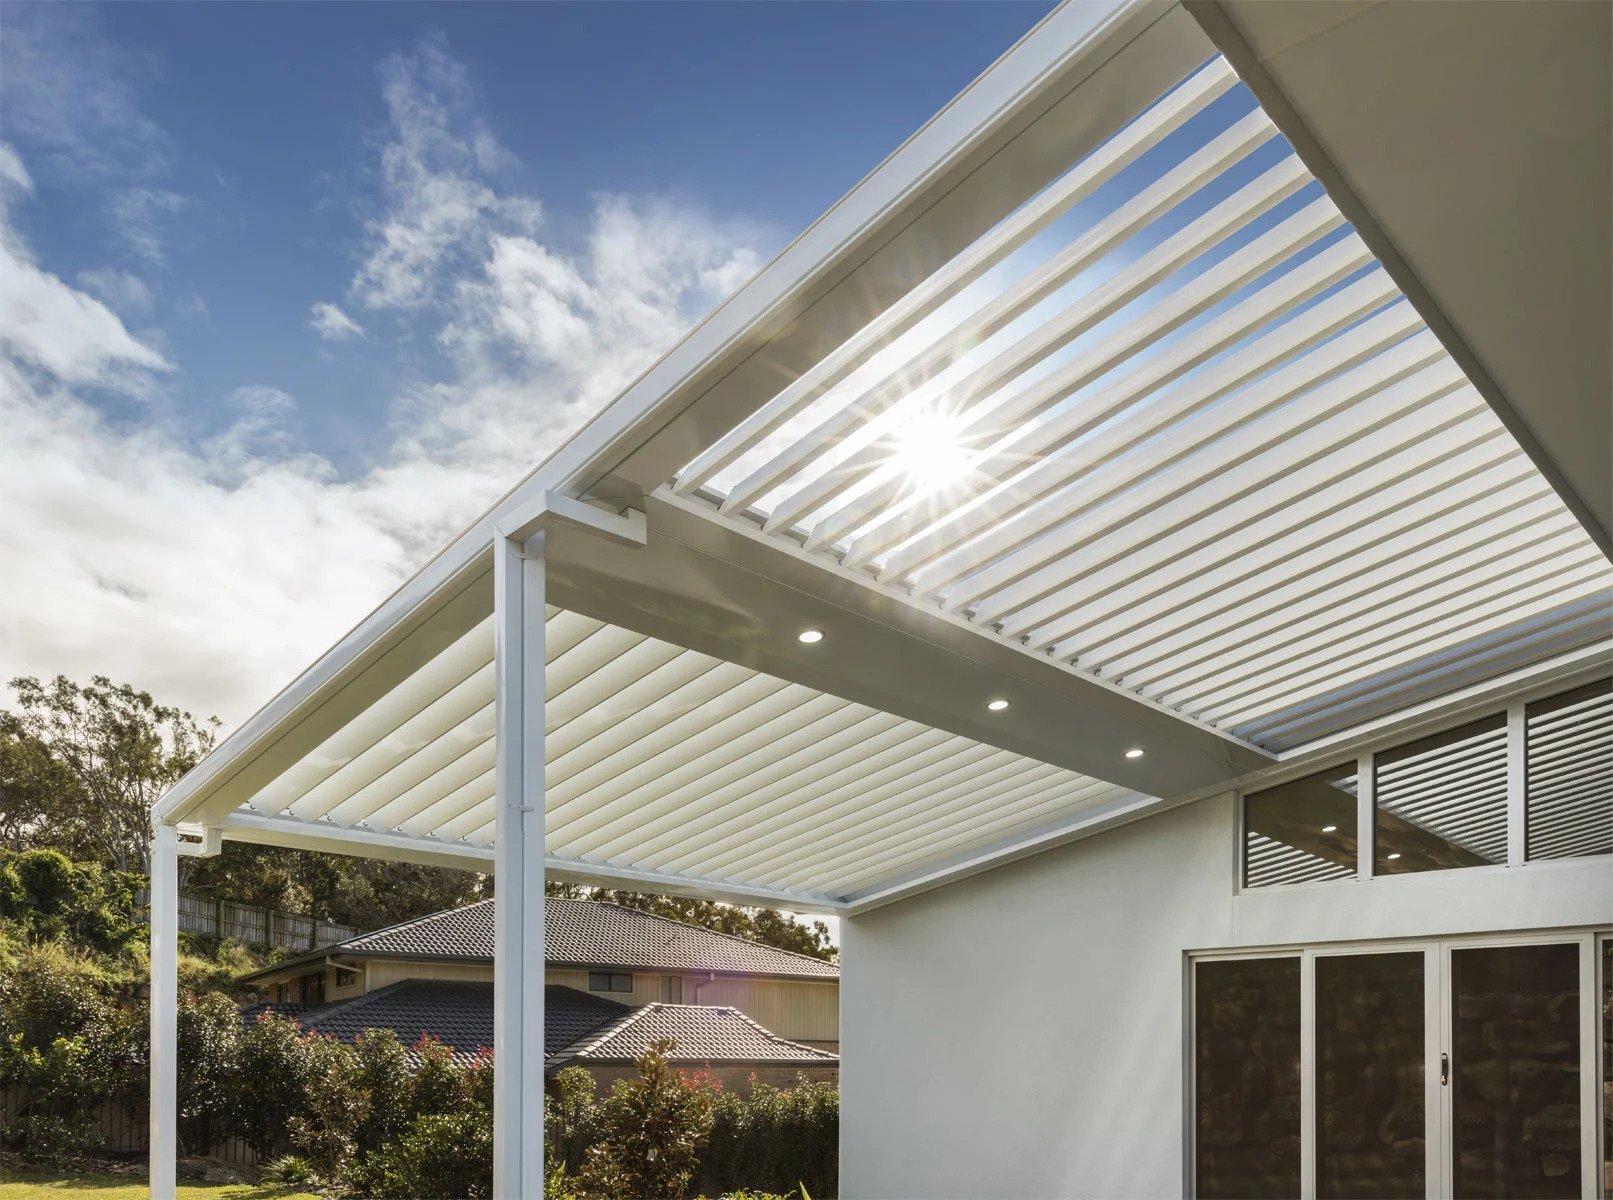 kilsyth, pergola, contact, outdoor, impressions, required, your, call, listen, ability, best, listen, means, need, information, further, Outback Flat Roof Carport